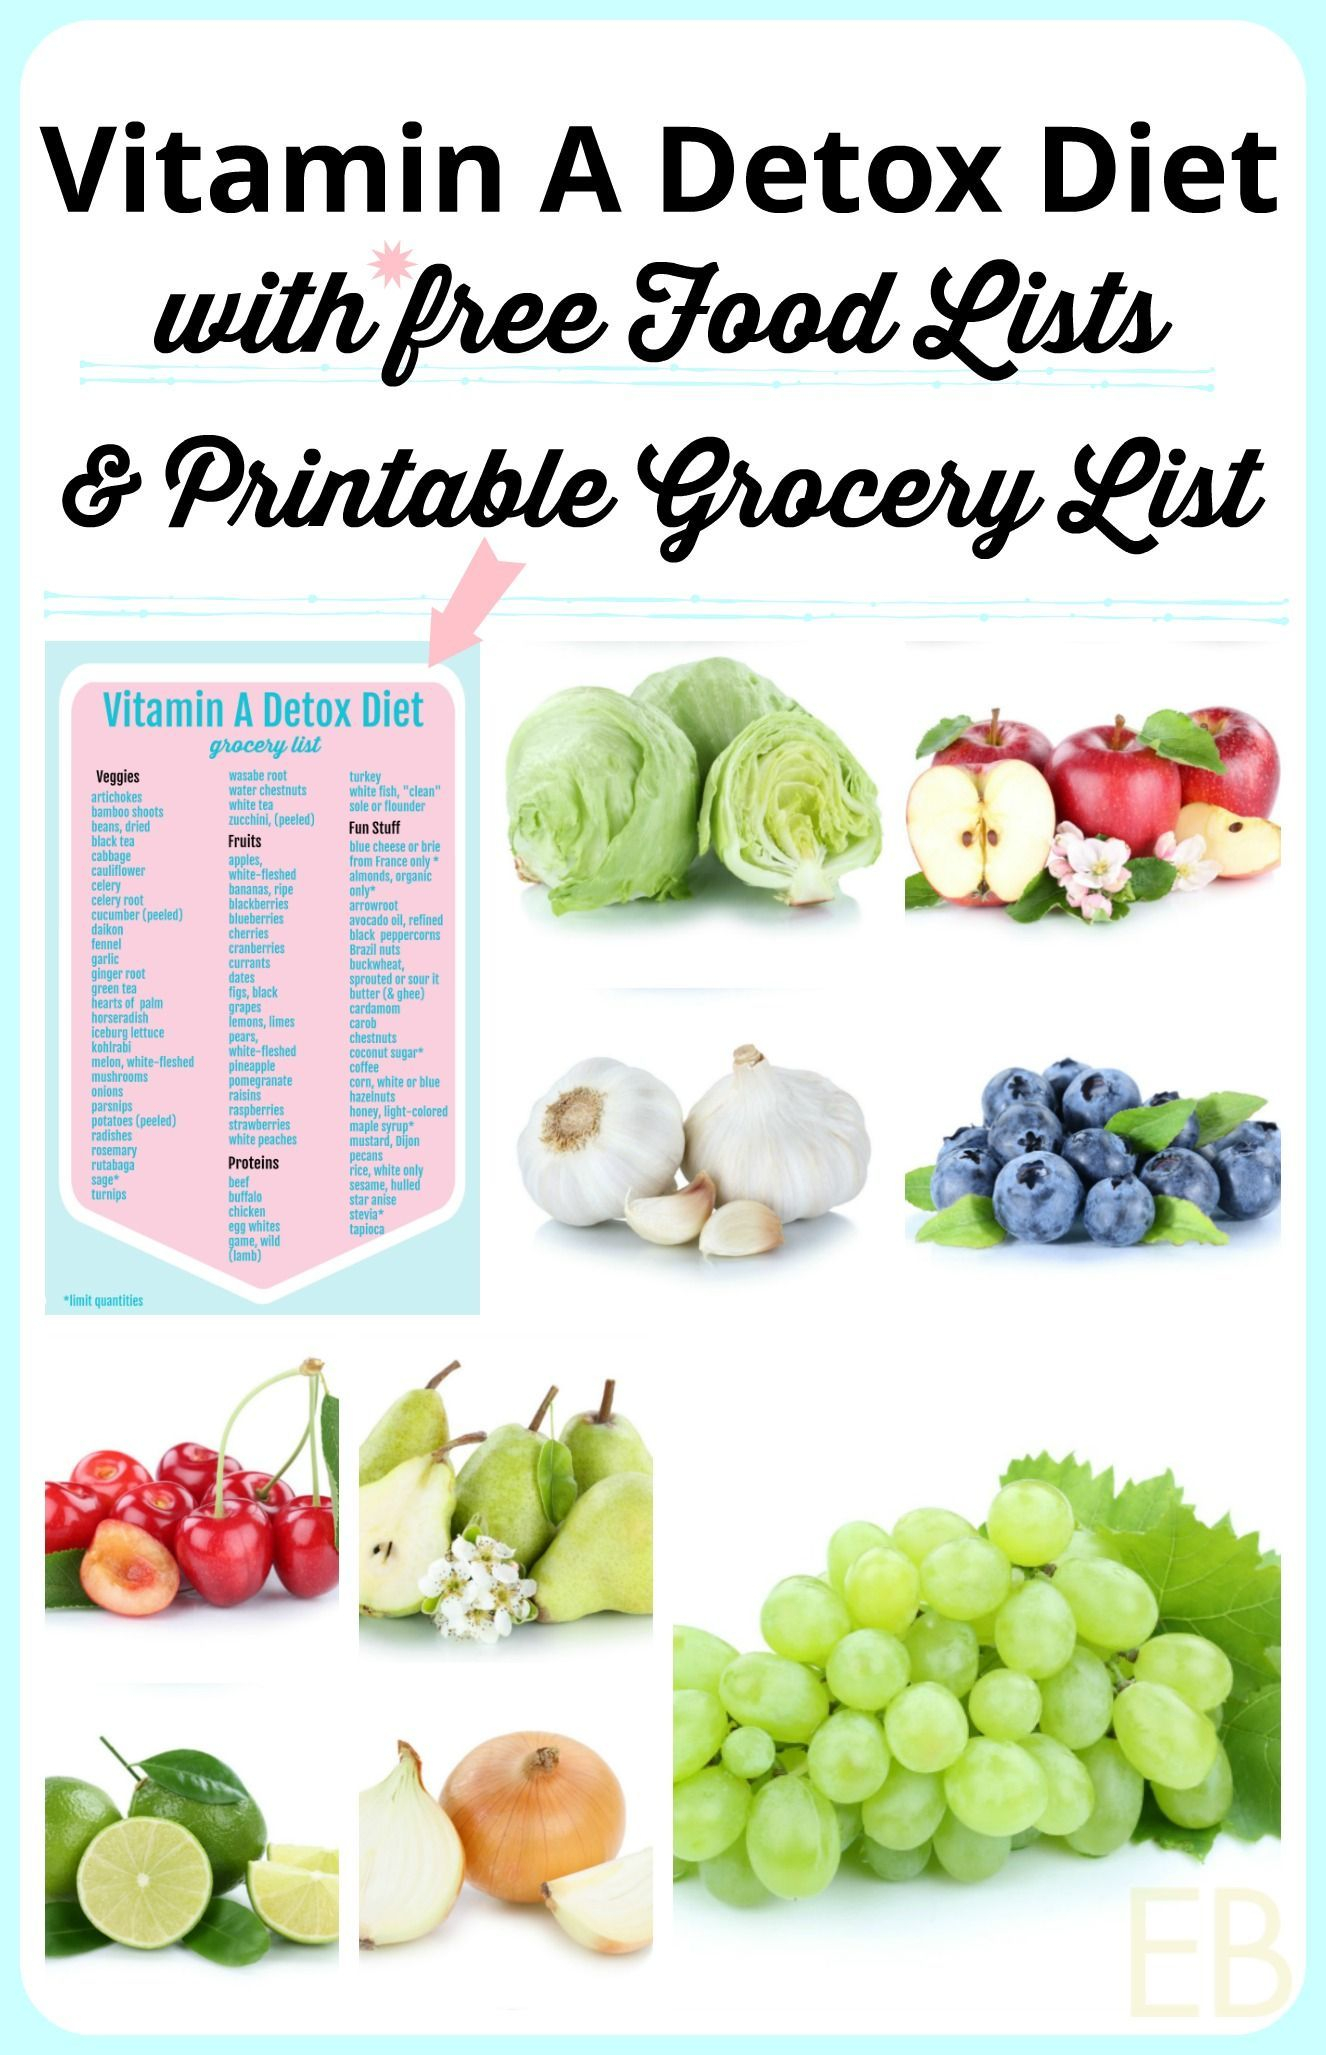 Vitamin A Detox Diet Free Printable Food Lists what To 